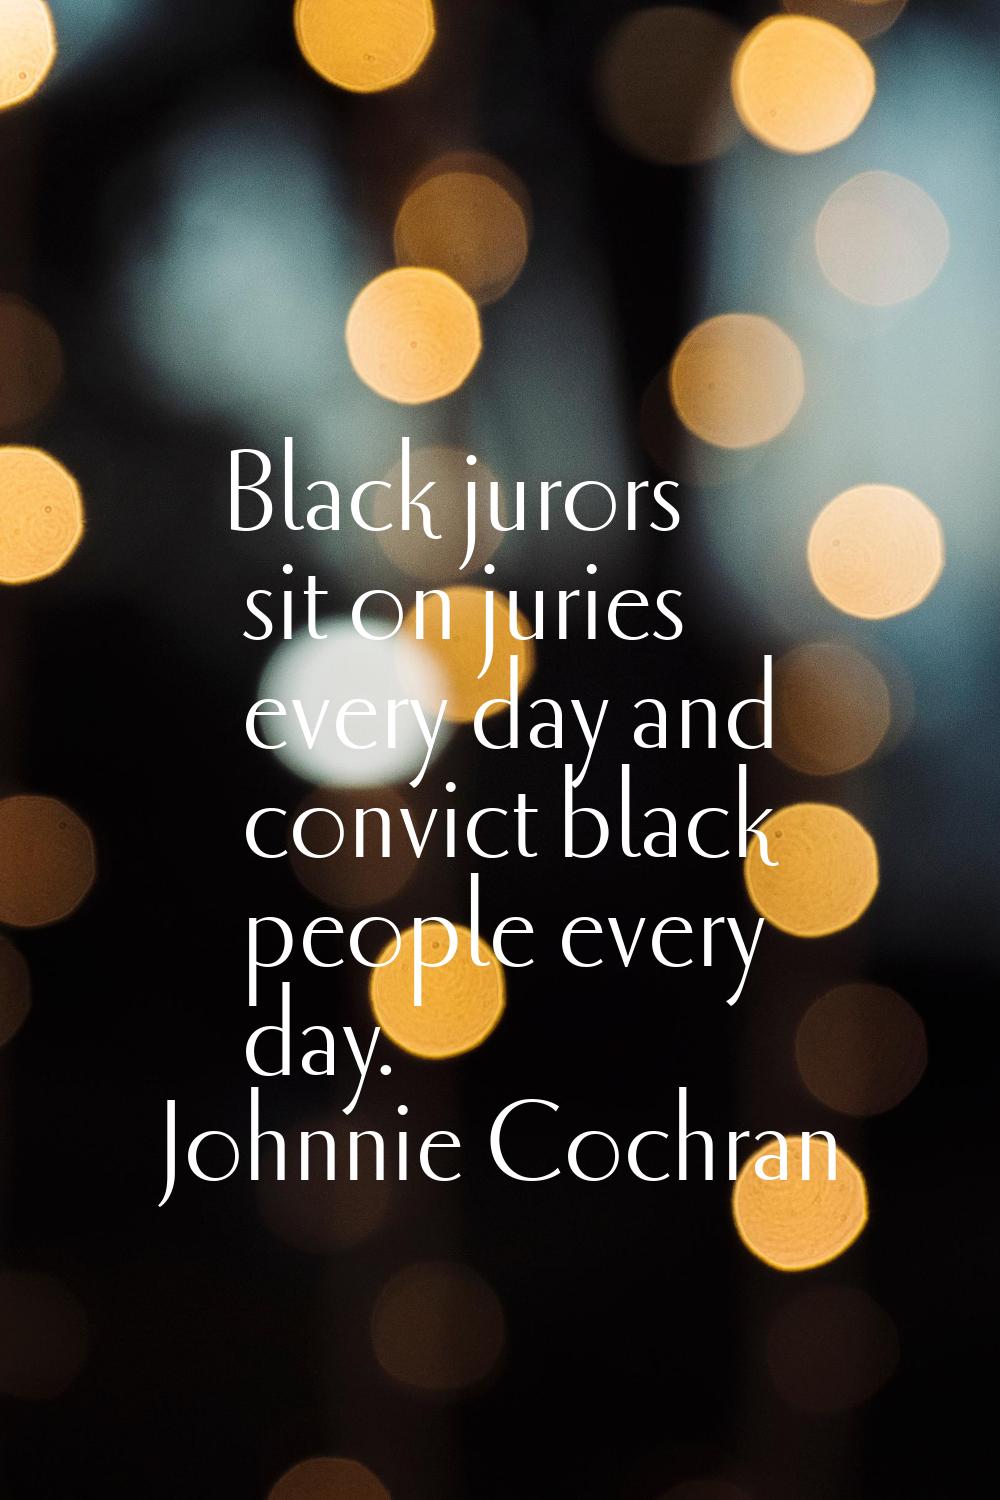 Black jurors sit on juries every day and convict black people every day.